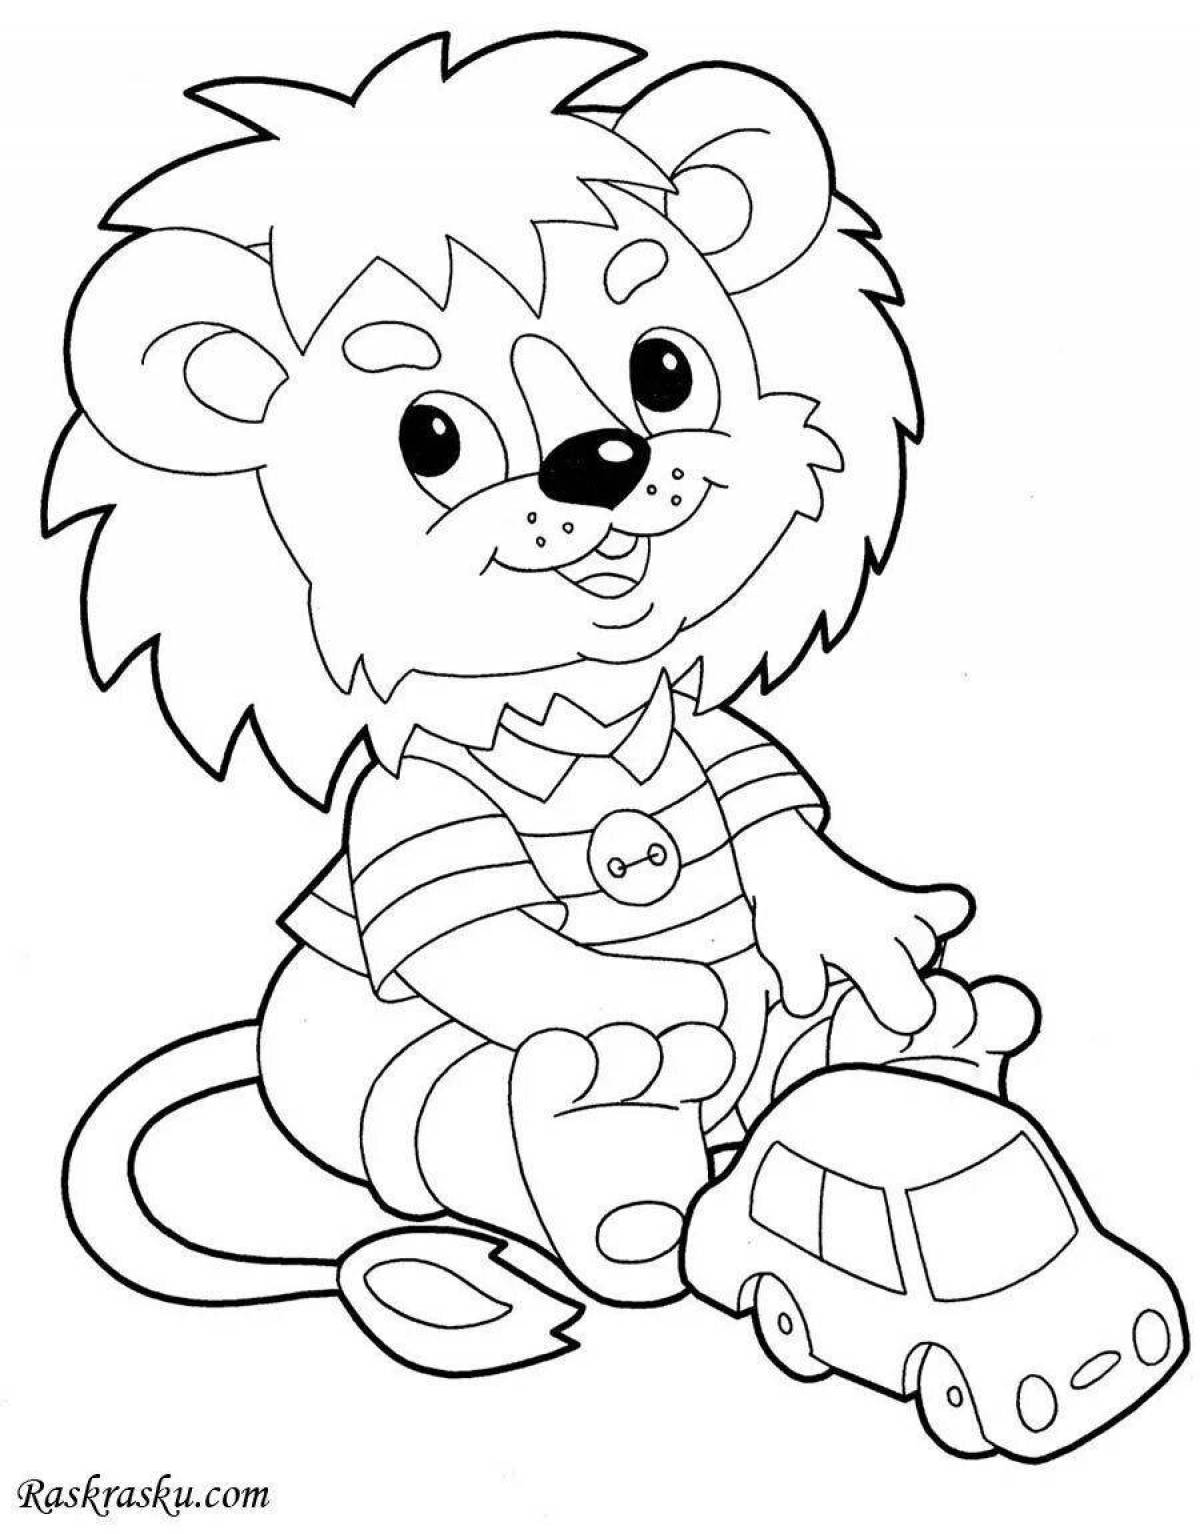 Cute lion coloring for kids